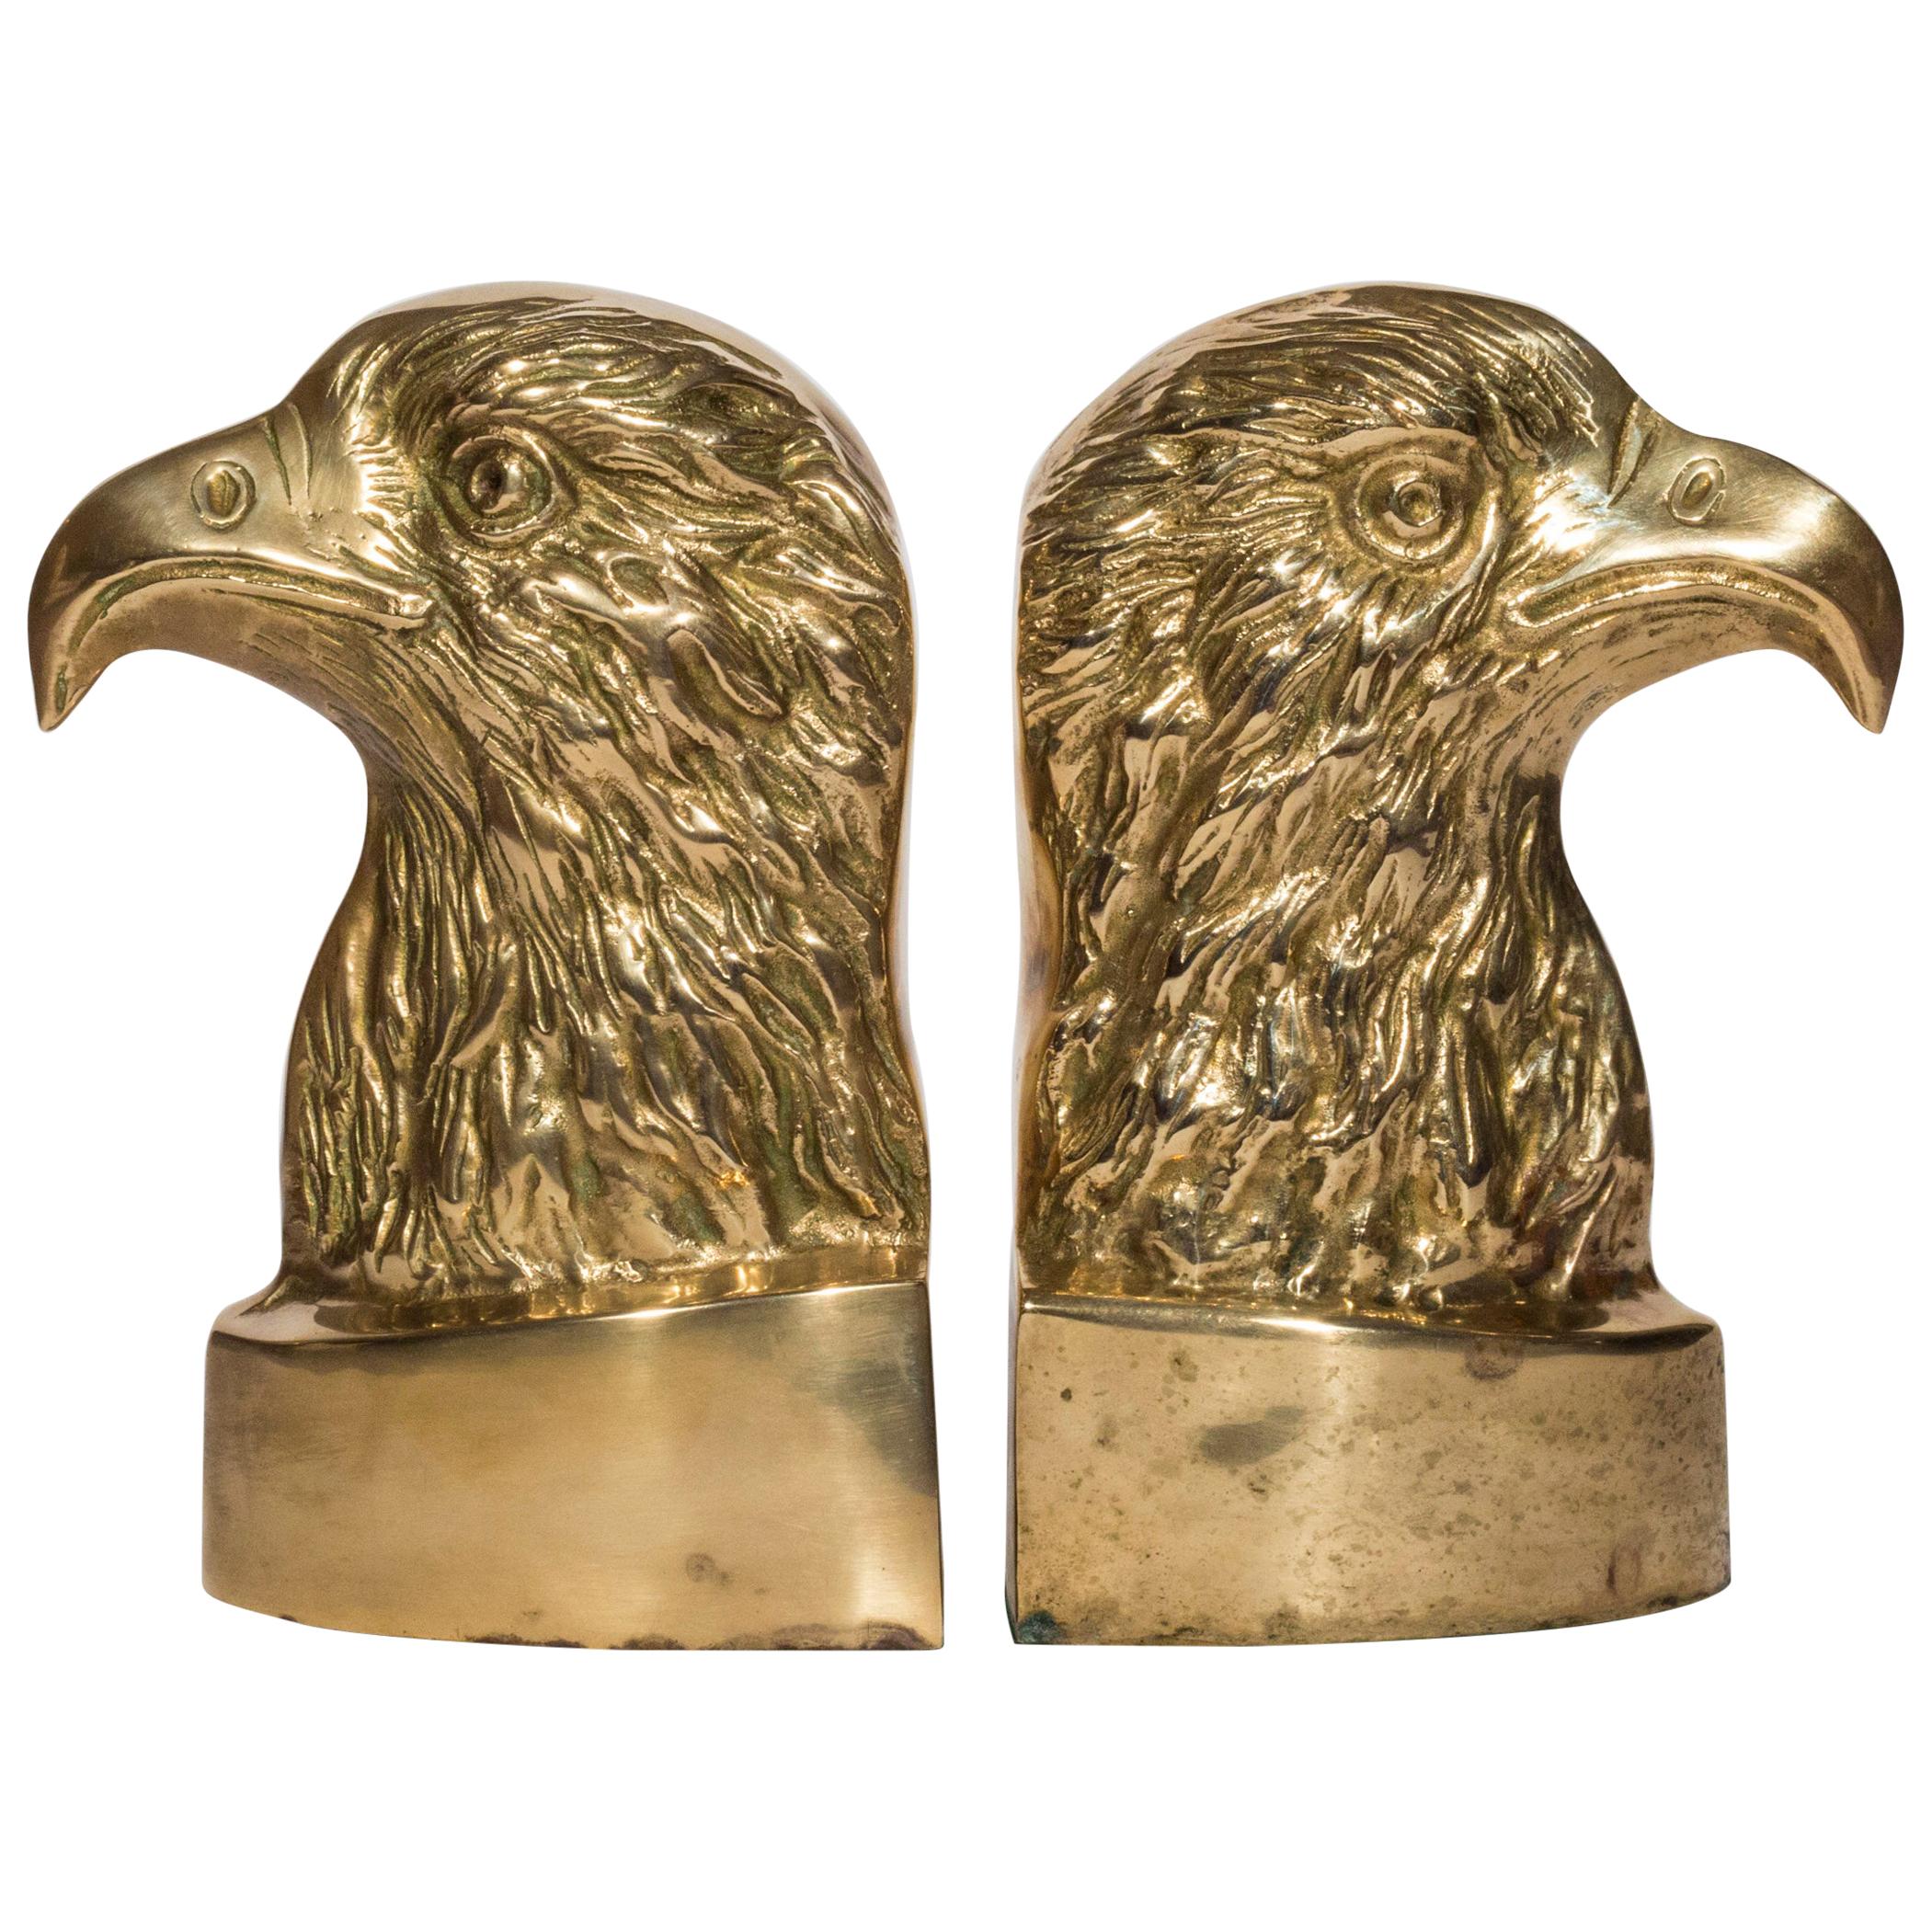 Vintage Pair of Brass Eagle Bookends or Doorstops